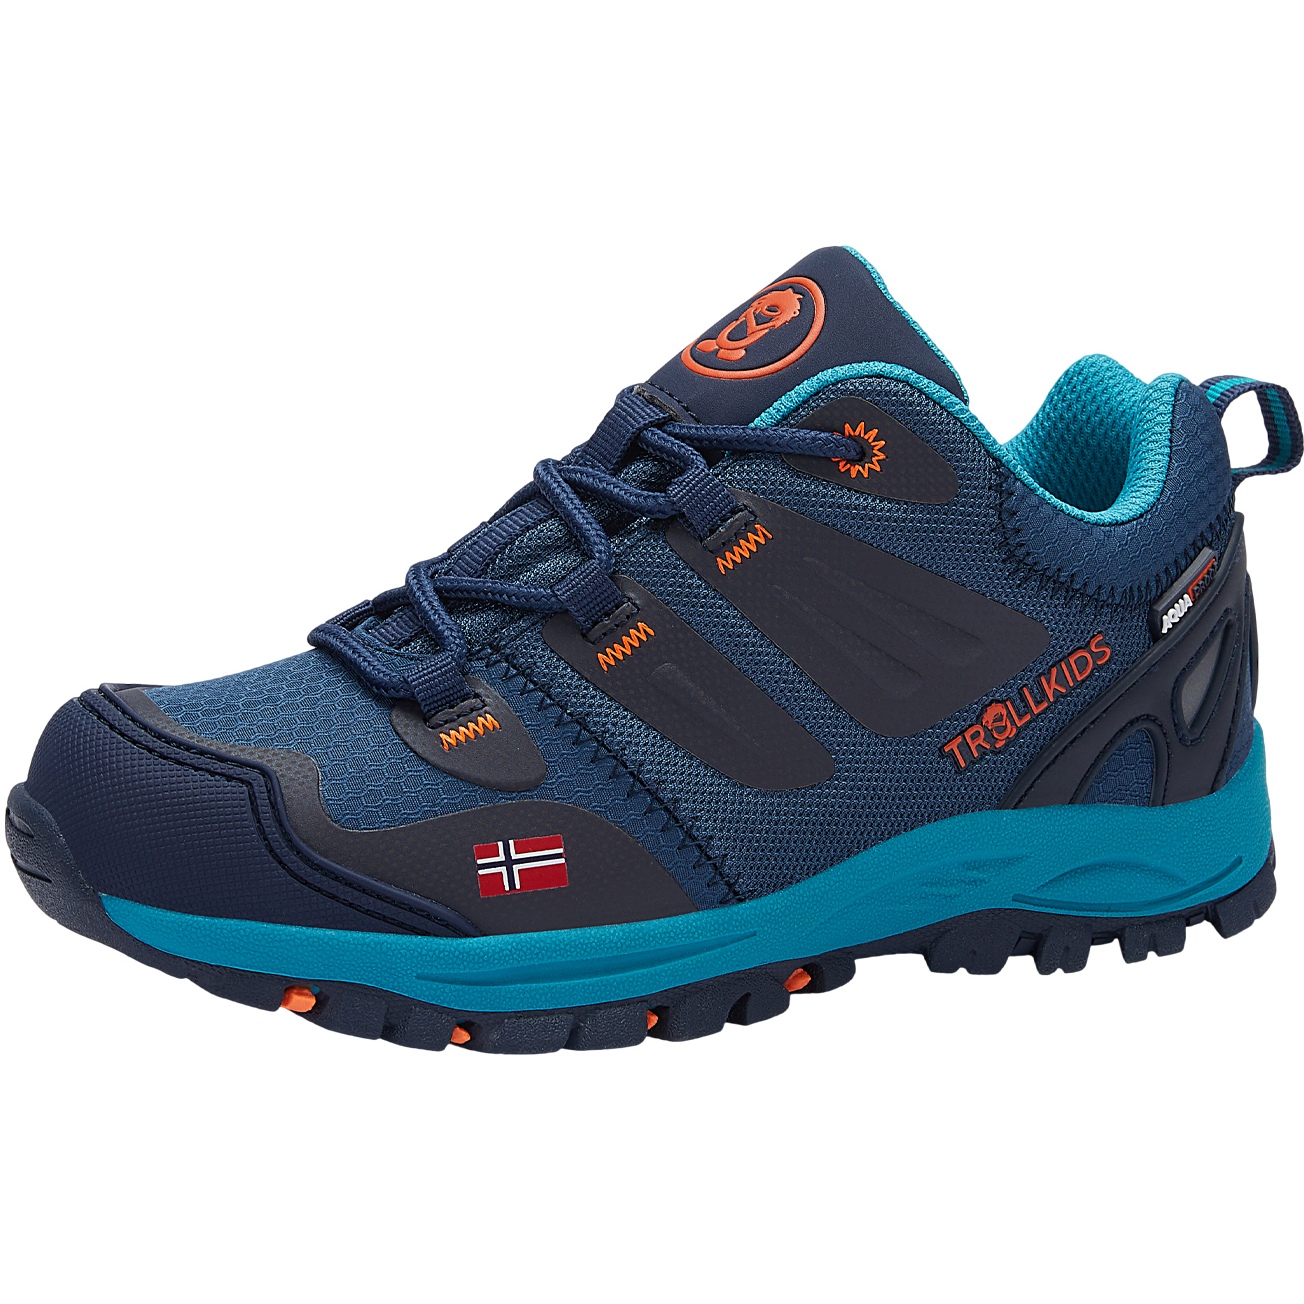 Picture of Trollkids Rondane Low Kids Hiker Shoes - Mystic Blue/Lake Blue